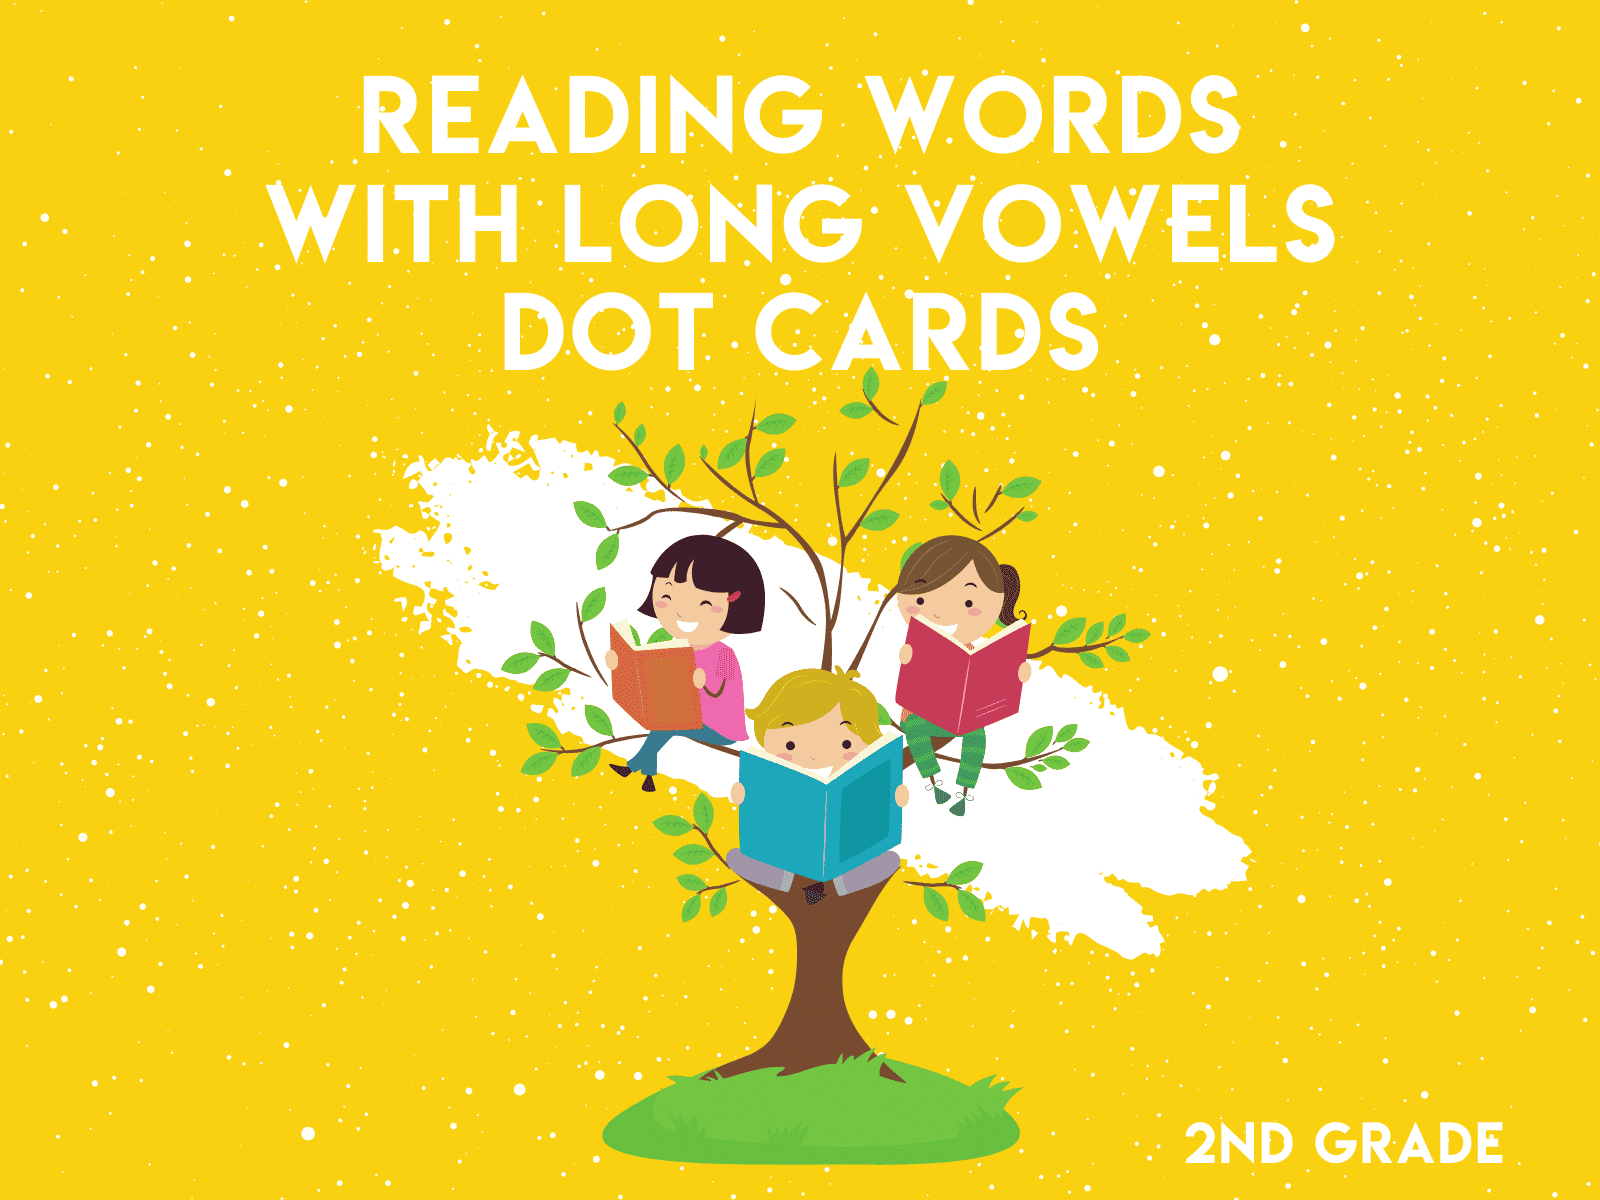 Second grade reading words with long vowels dot cards free online learning resource.